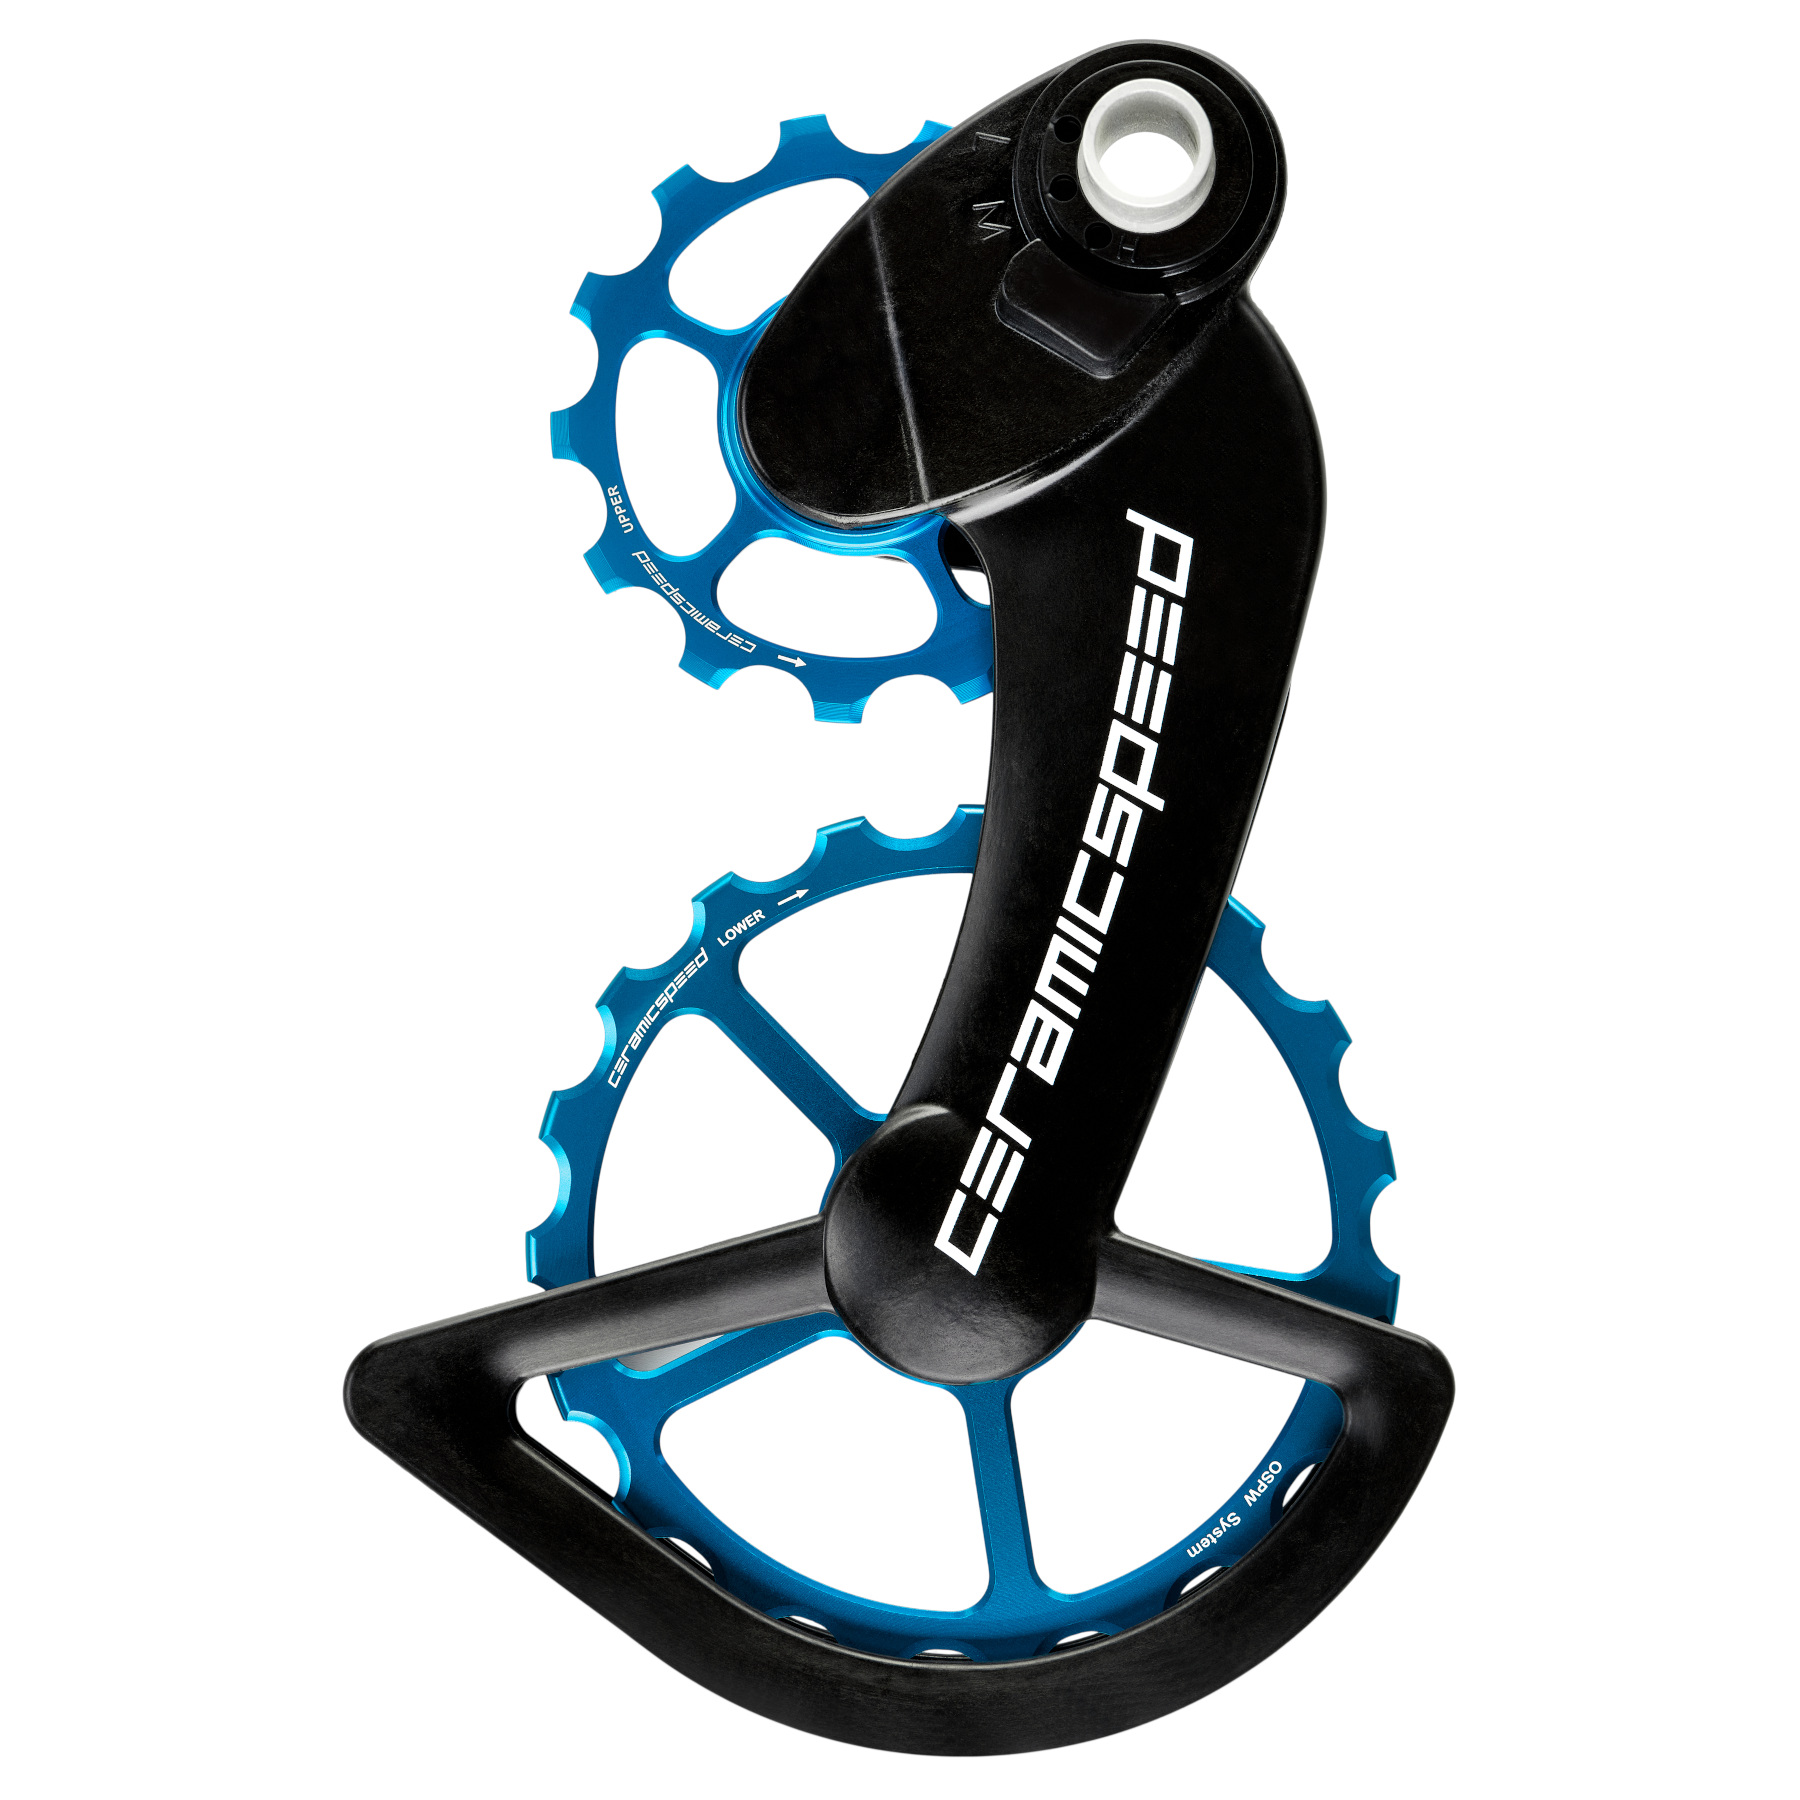 Image of CeramicSpeed OSPW Derailleur Pulley System - for Campagnolo 11s | 13/19 Teeth | Coated Bearings - blue